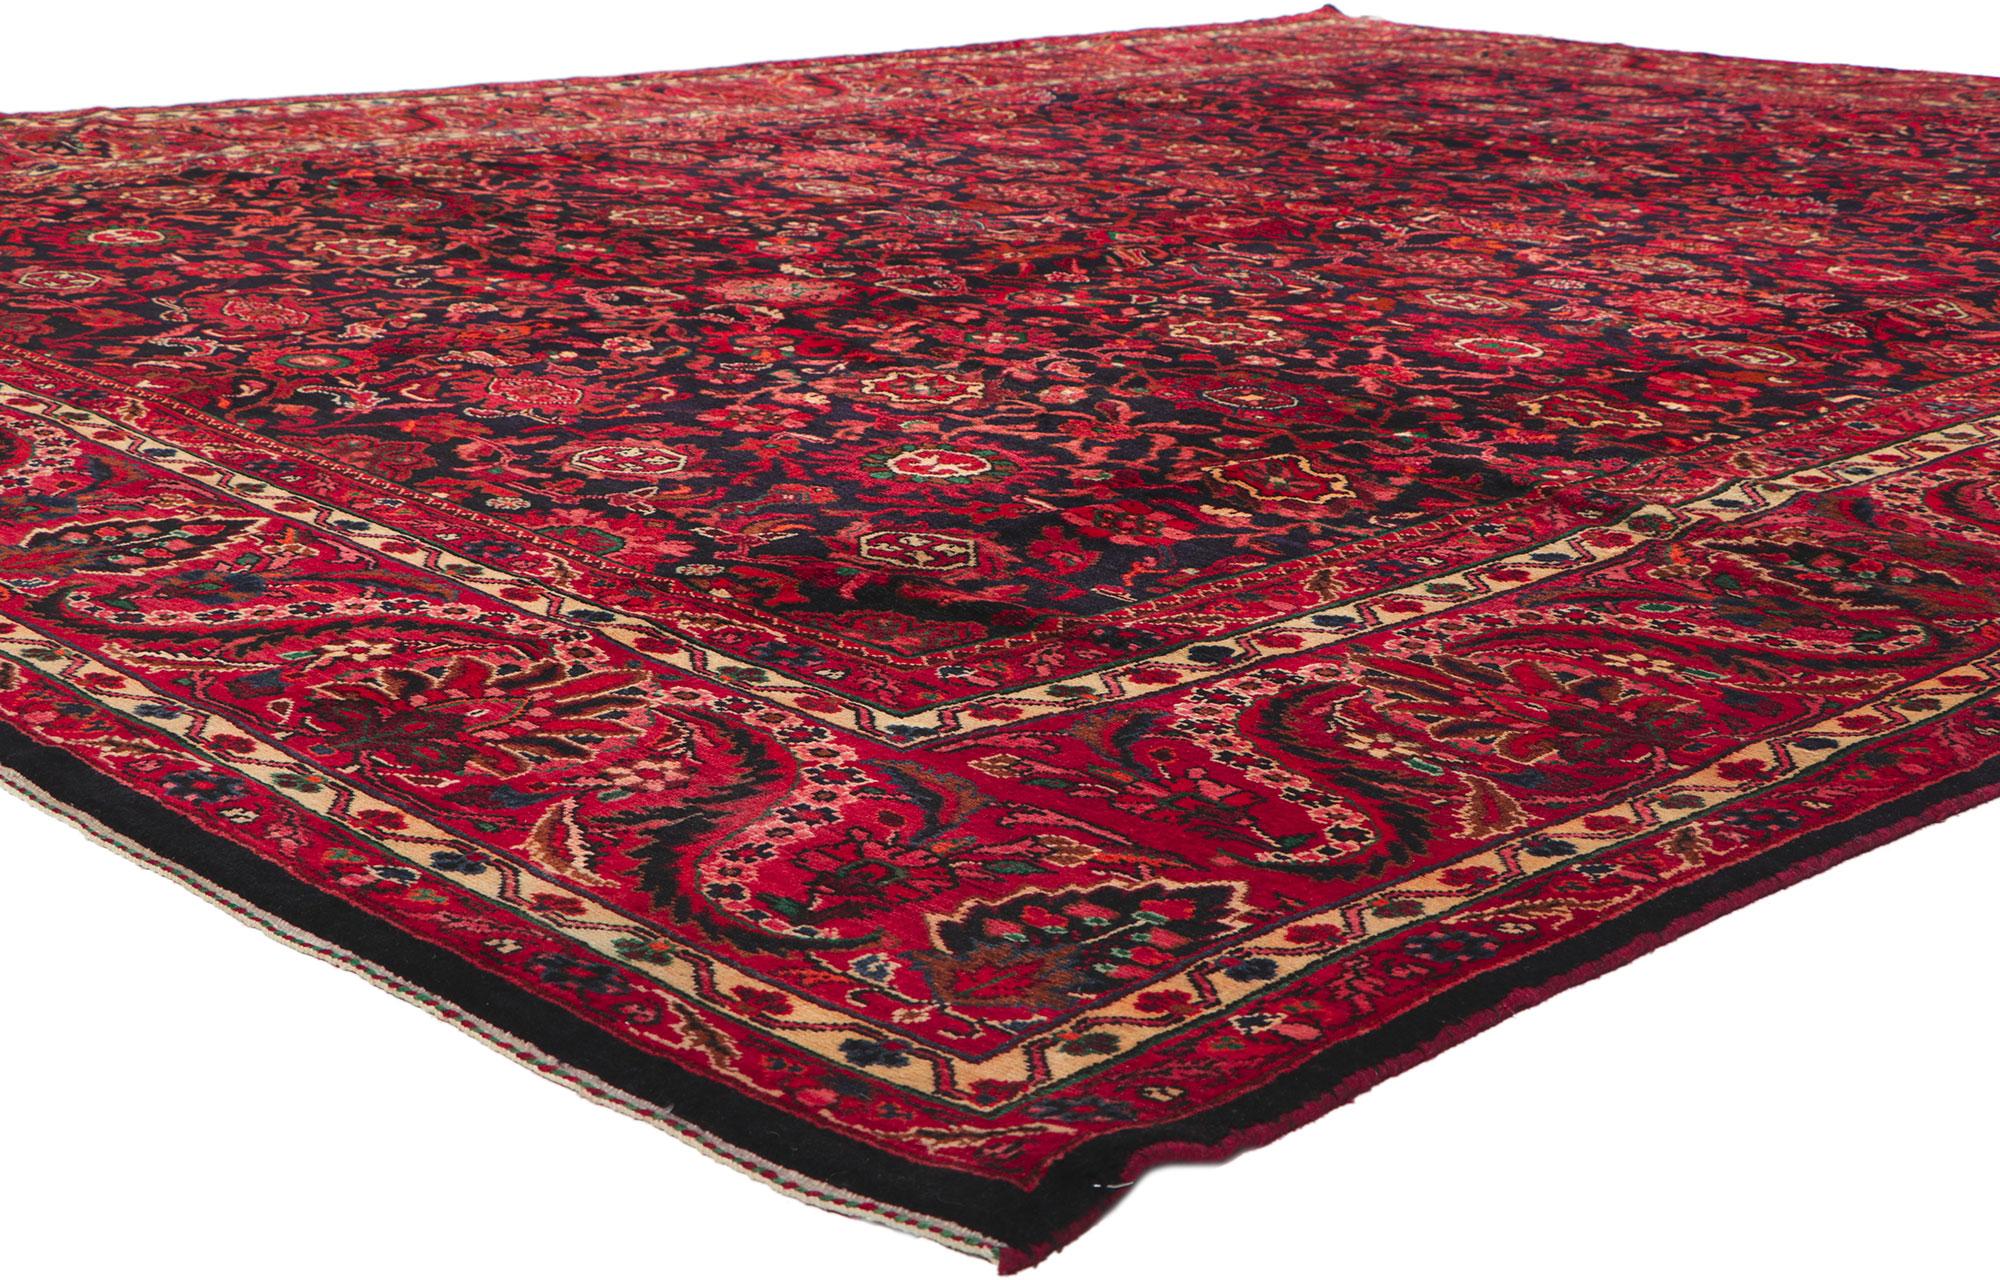 61117 Vintage Persian Malayer Rug, 11'00 x 14'03. ?Emanating a timeless design and beguiling beauty in saturated colors, this hand-knotted wool vintage Persian Malayer rug is poised to impress. An allover repeating botanical pattern spread across